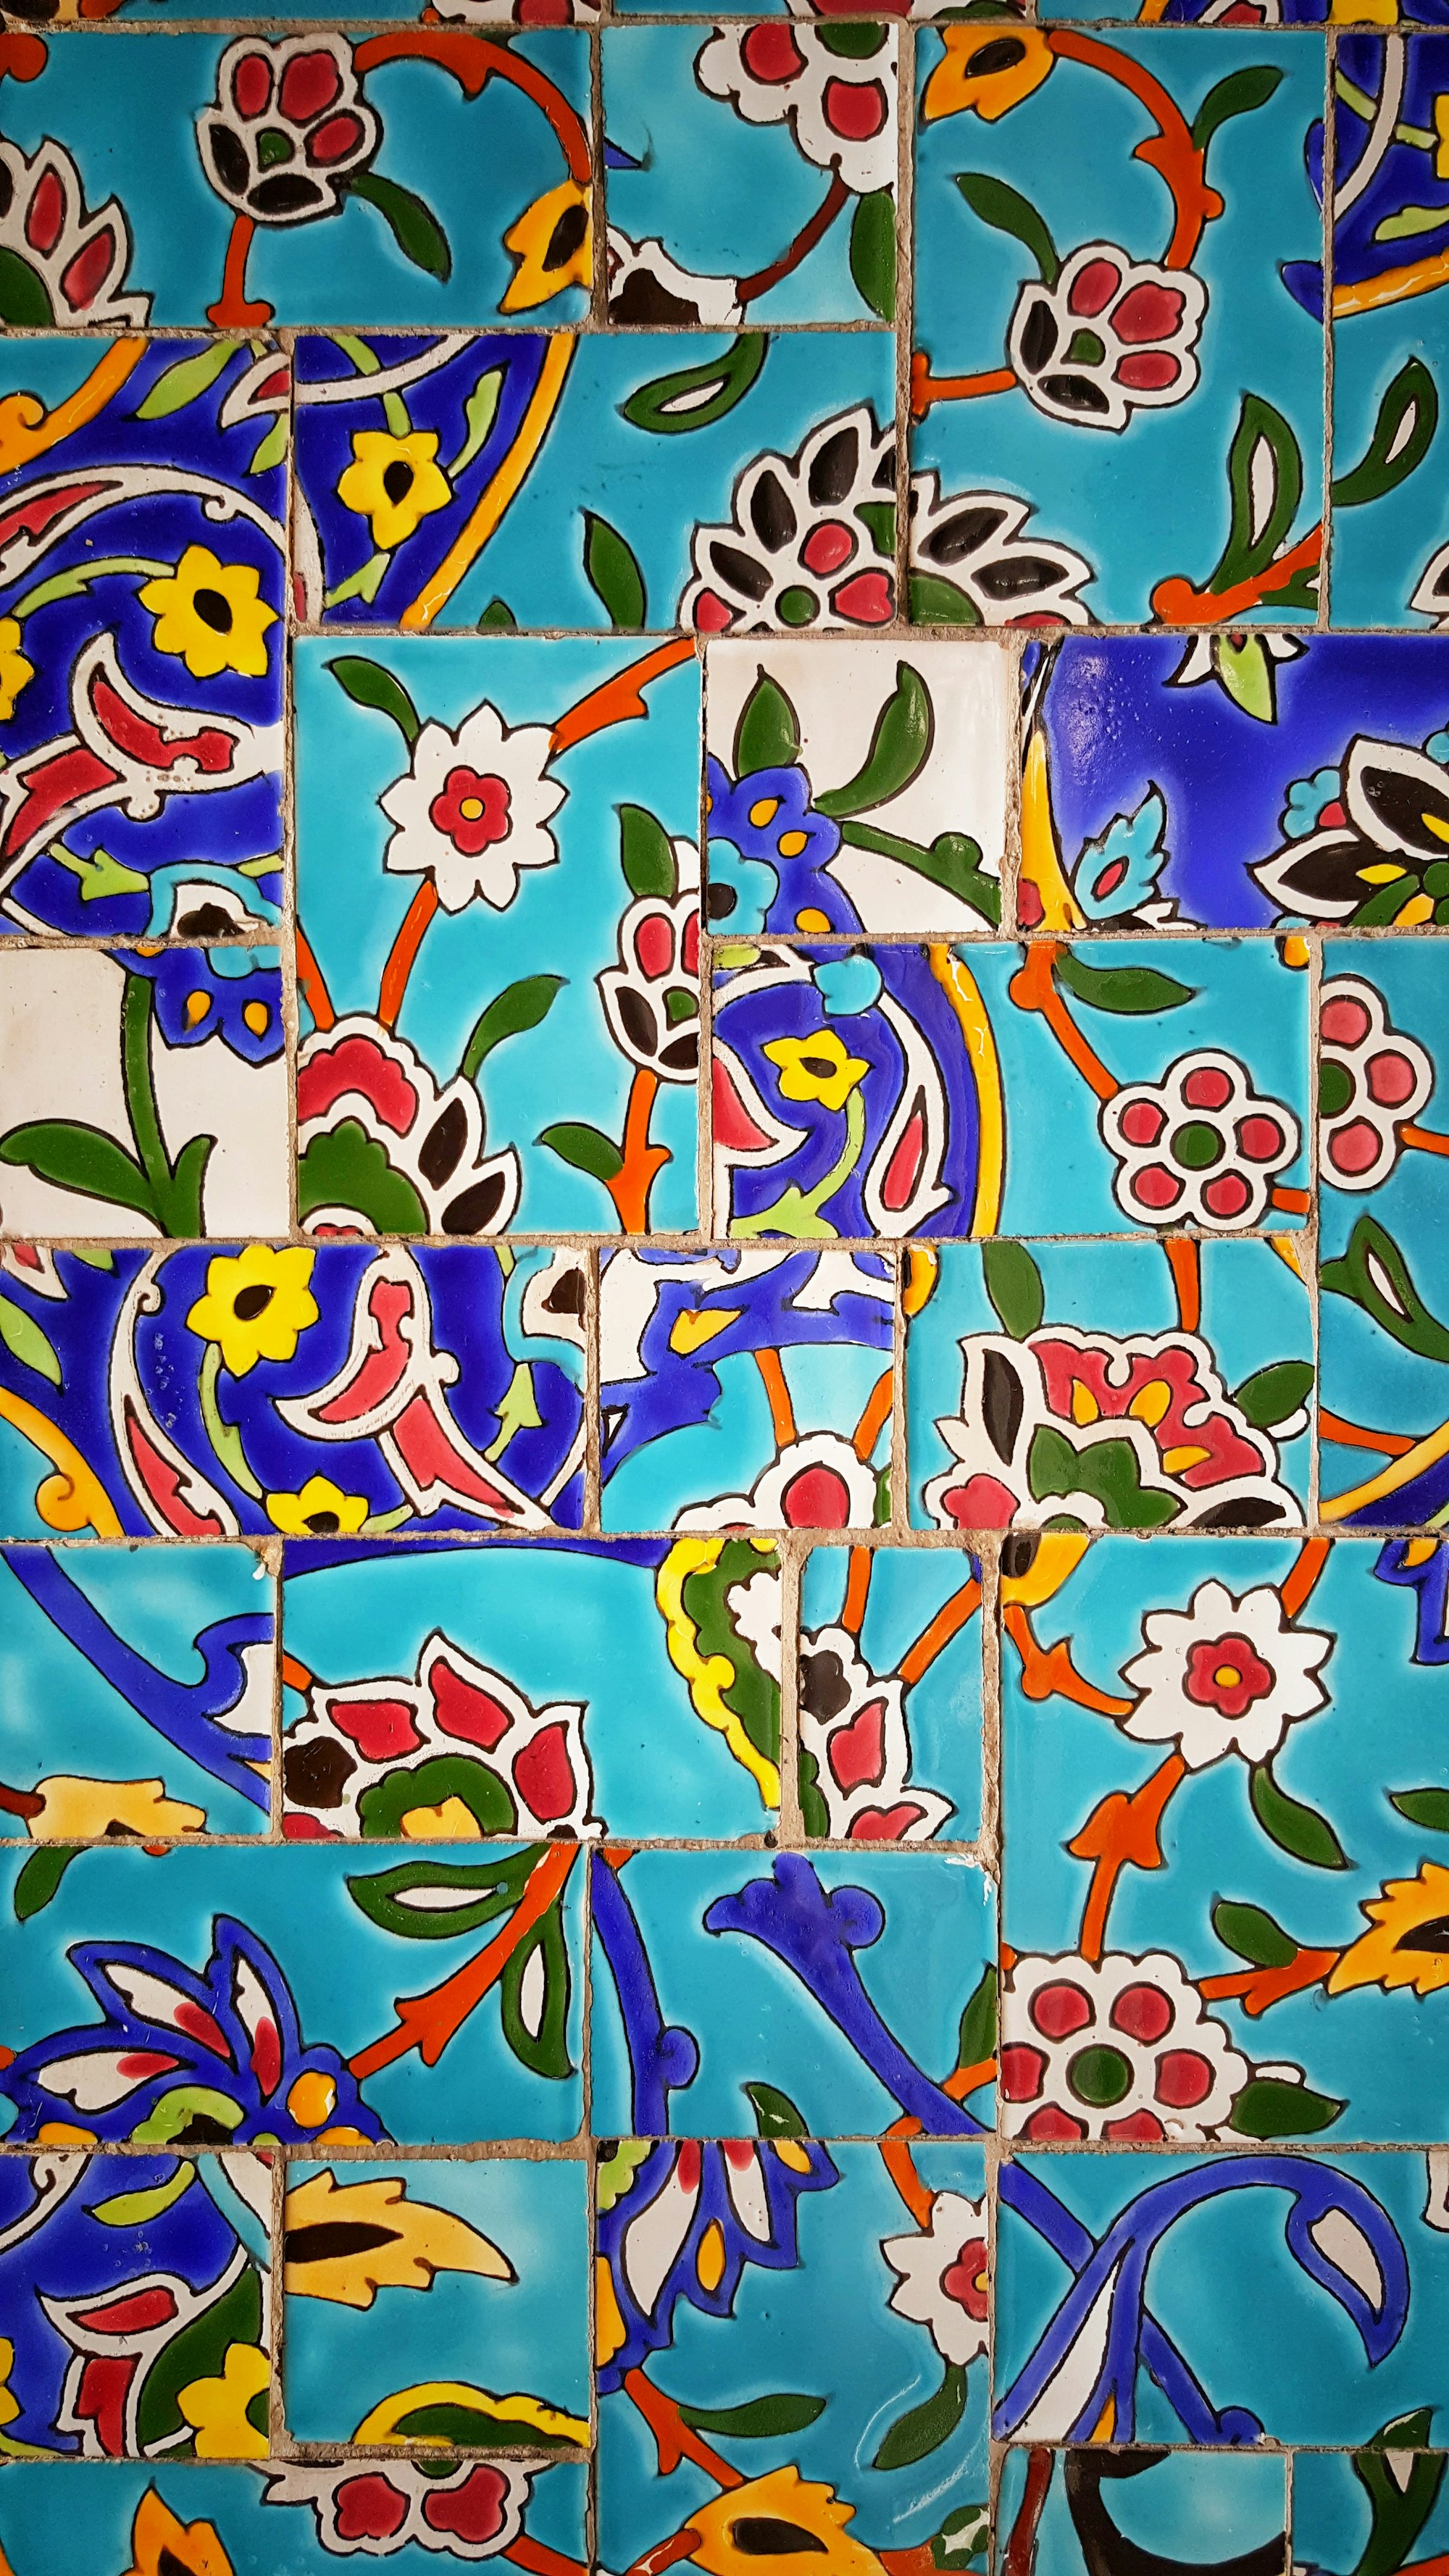 A tiled wall with unmatched flower tiles